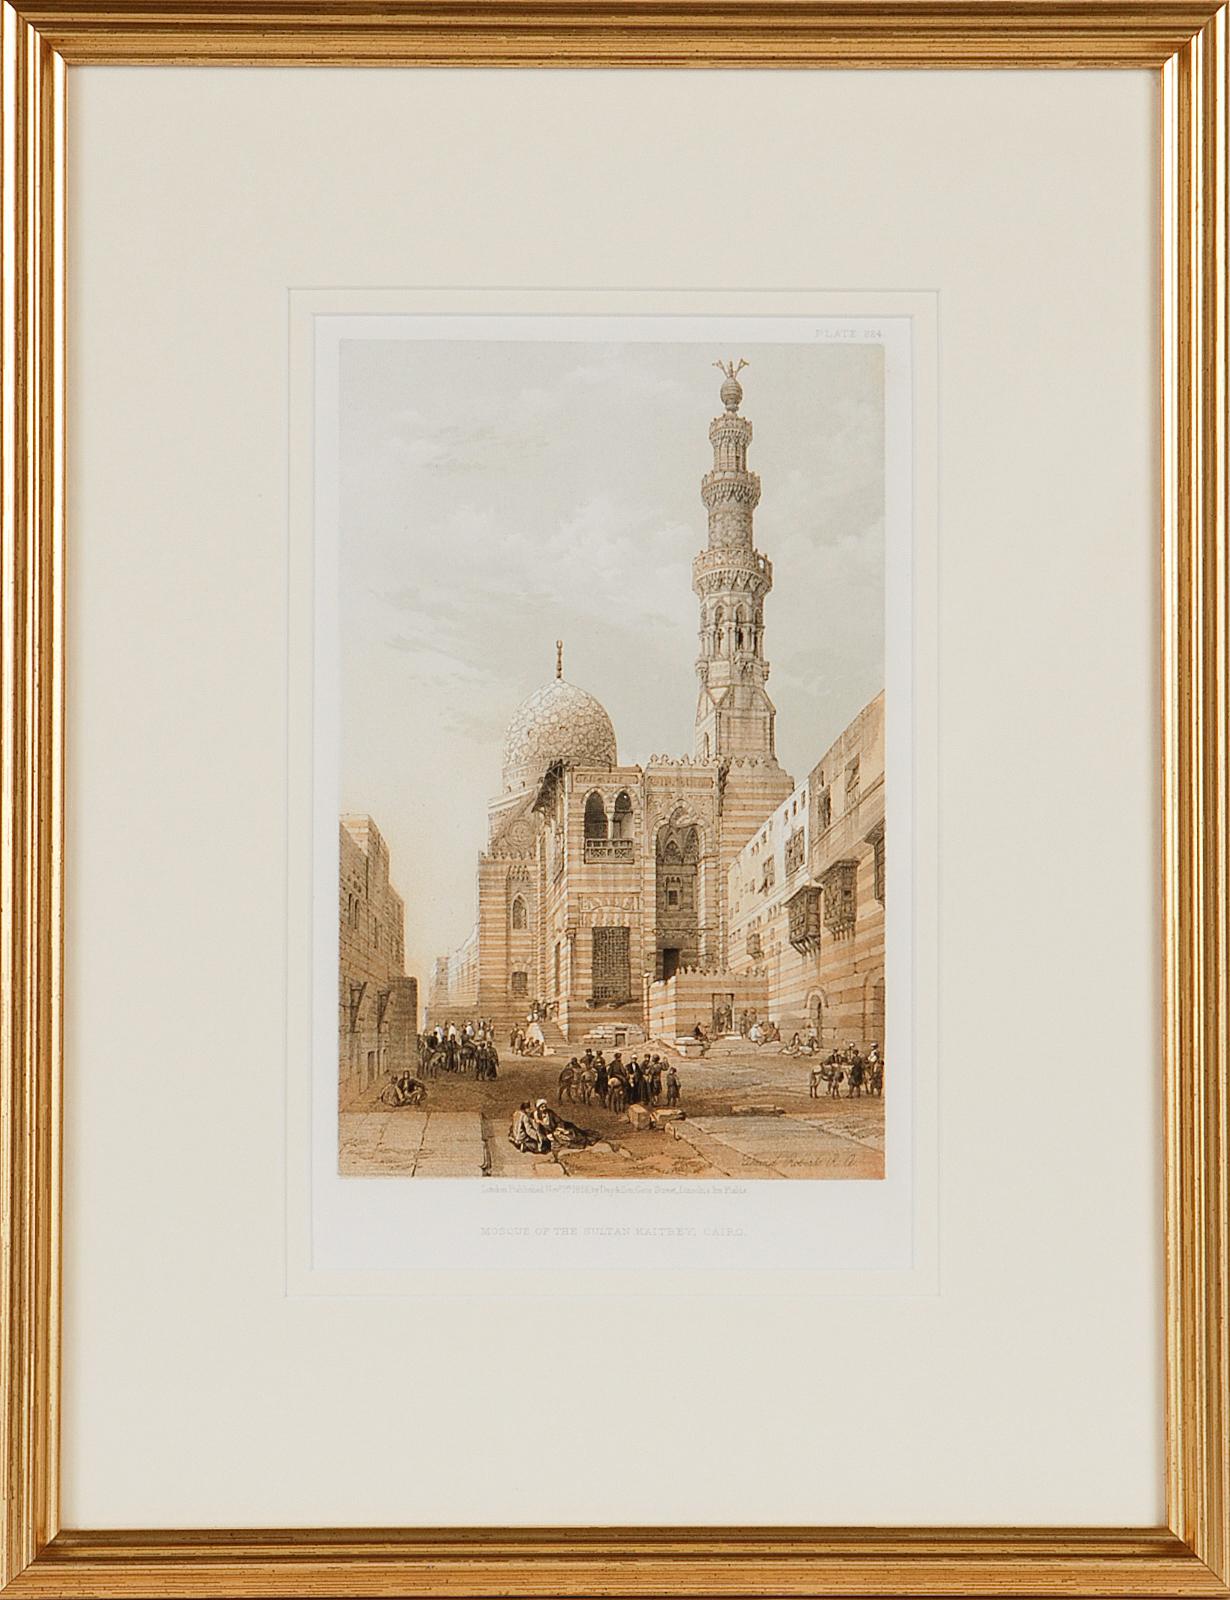 This is an original 19th century duo-tone lithograph entitled "Mosque of the Sultan Kaitbey, Cairo" by David Roberts, from his Egypt, The Holy Land and Nubia volumes of the quarto edition, published in London by Day and Son in 1856. The lithographs